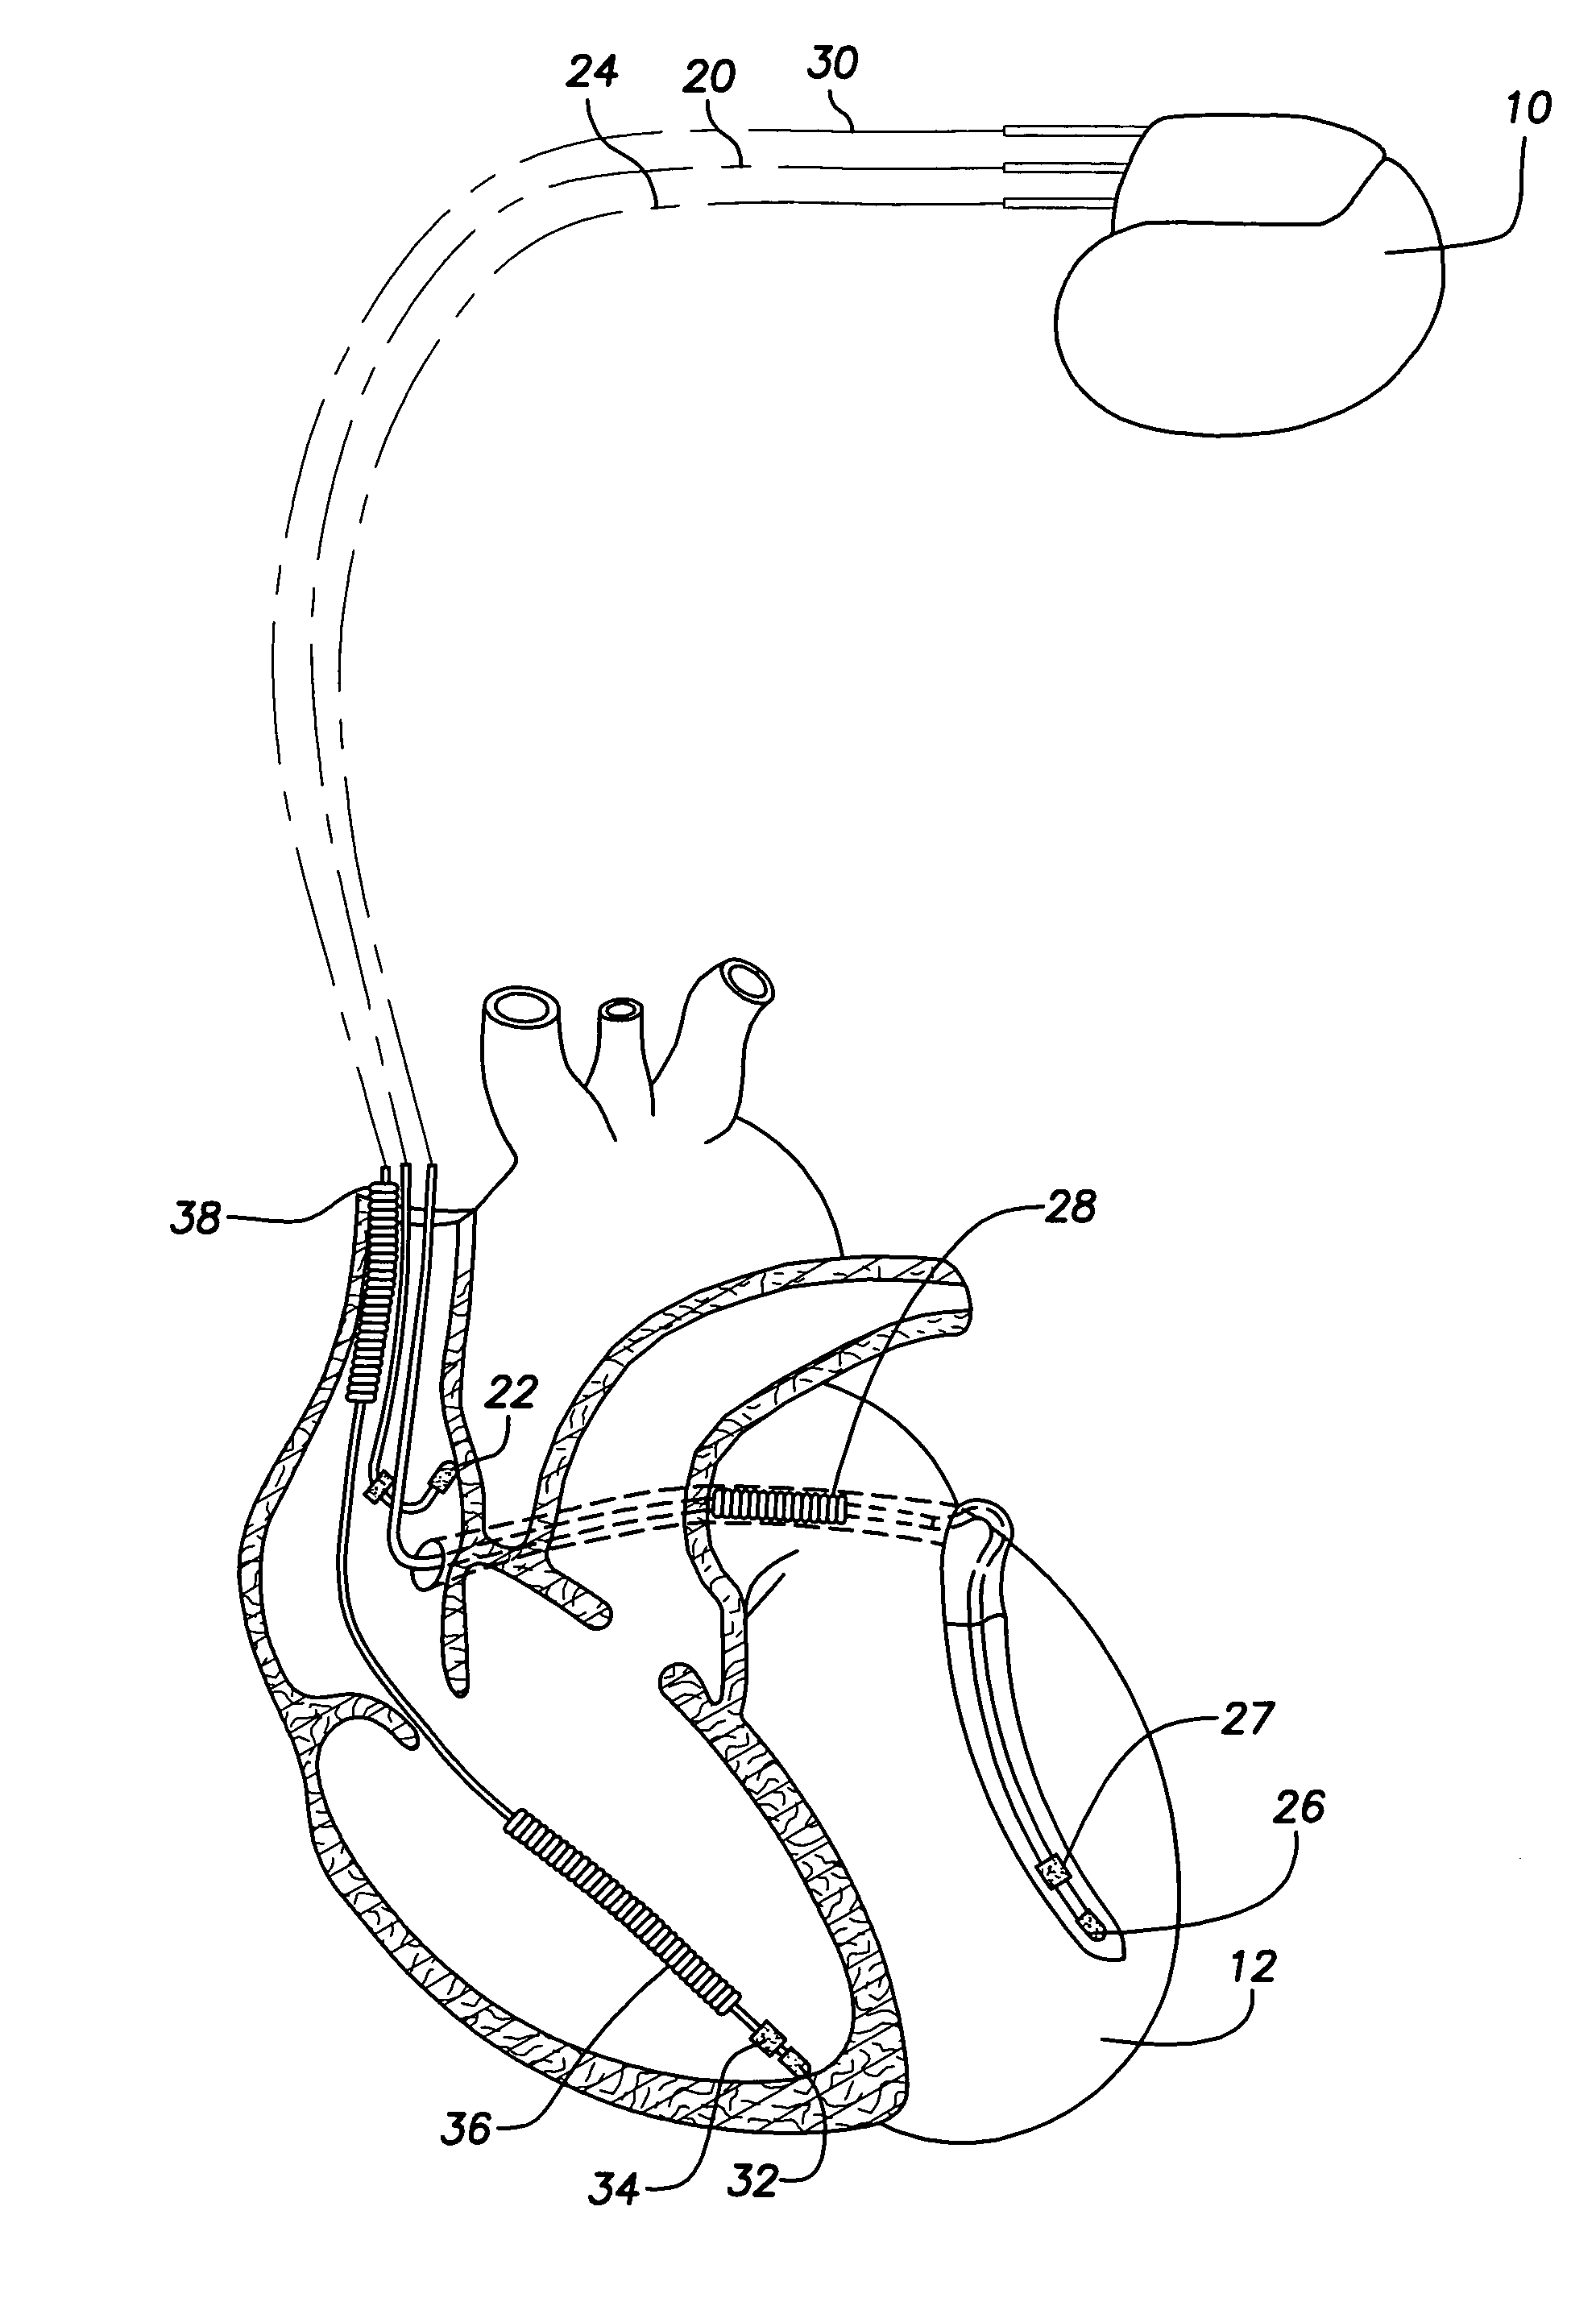 Implantable cardiac stimulation device and method that discriminates between and treats ventricular tachycardia and ventricular fibrillation